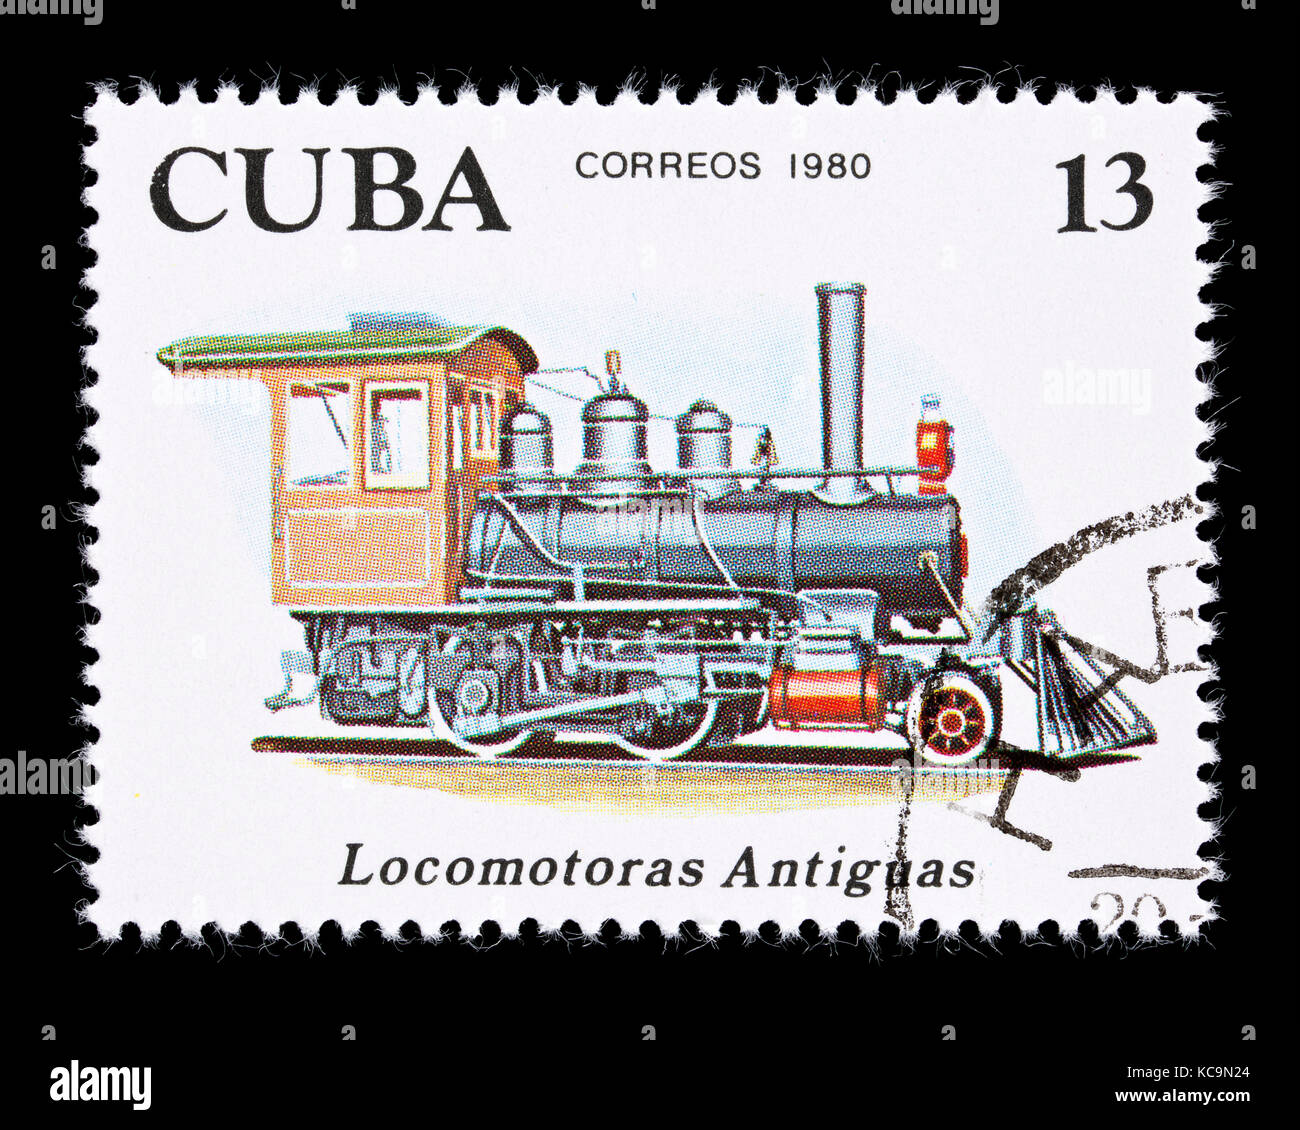 Postage stamp from Cuba depicting a 2-4-0 early steam locomotive/ Stock Photo